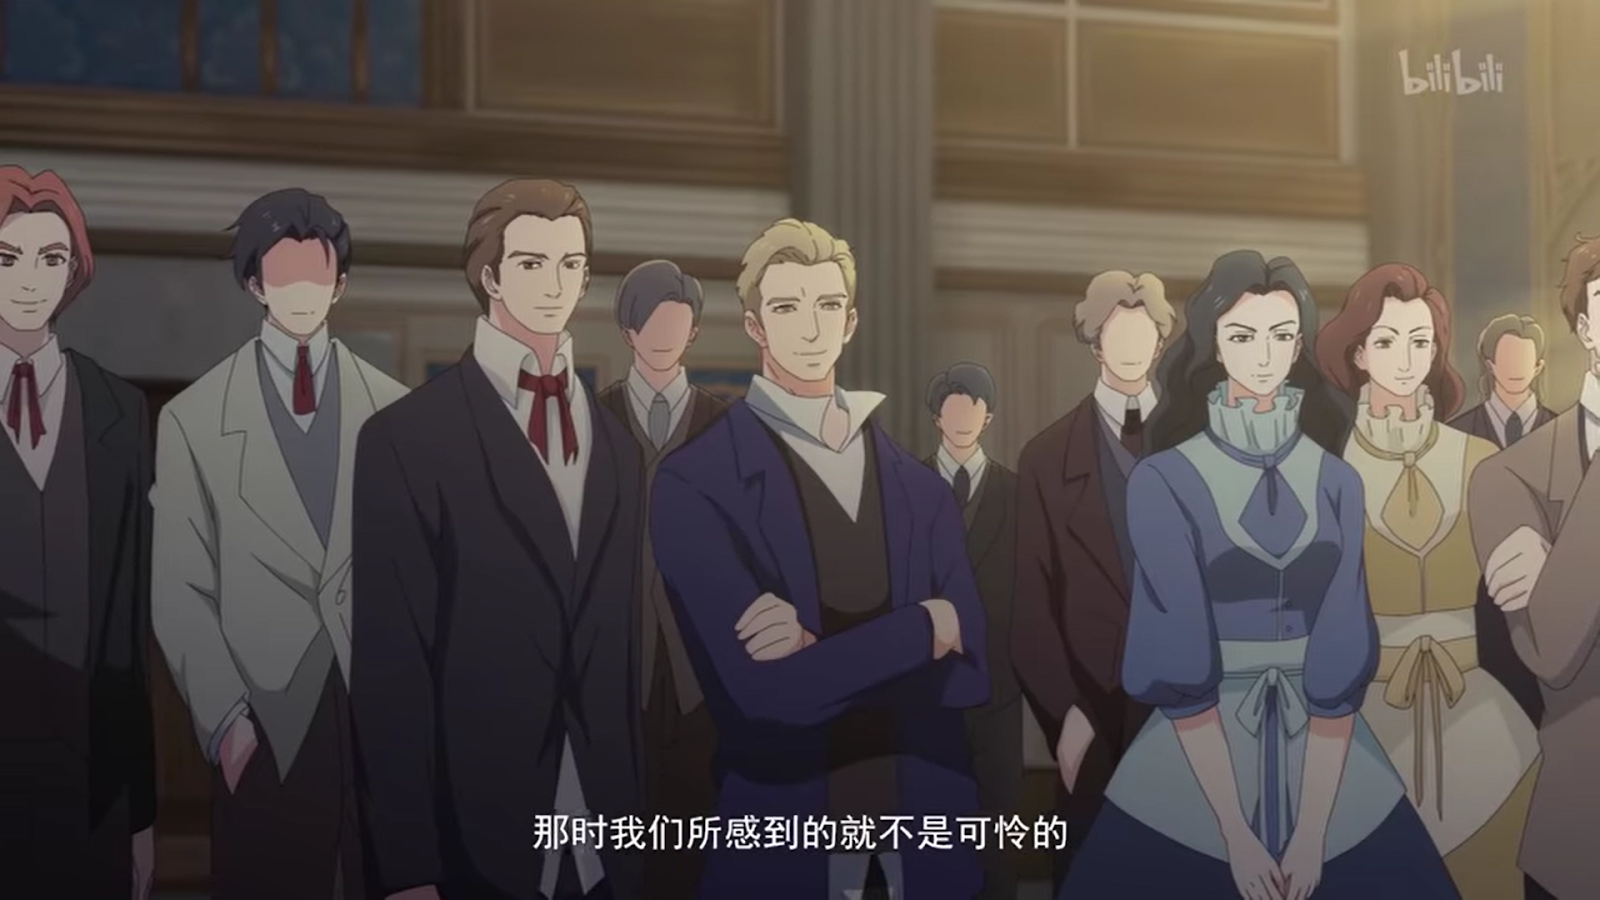 Chinas Young Marx Anime Sparks Philosophical Debate Criticism and G